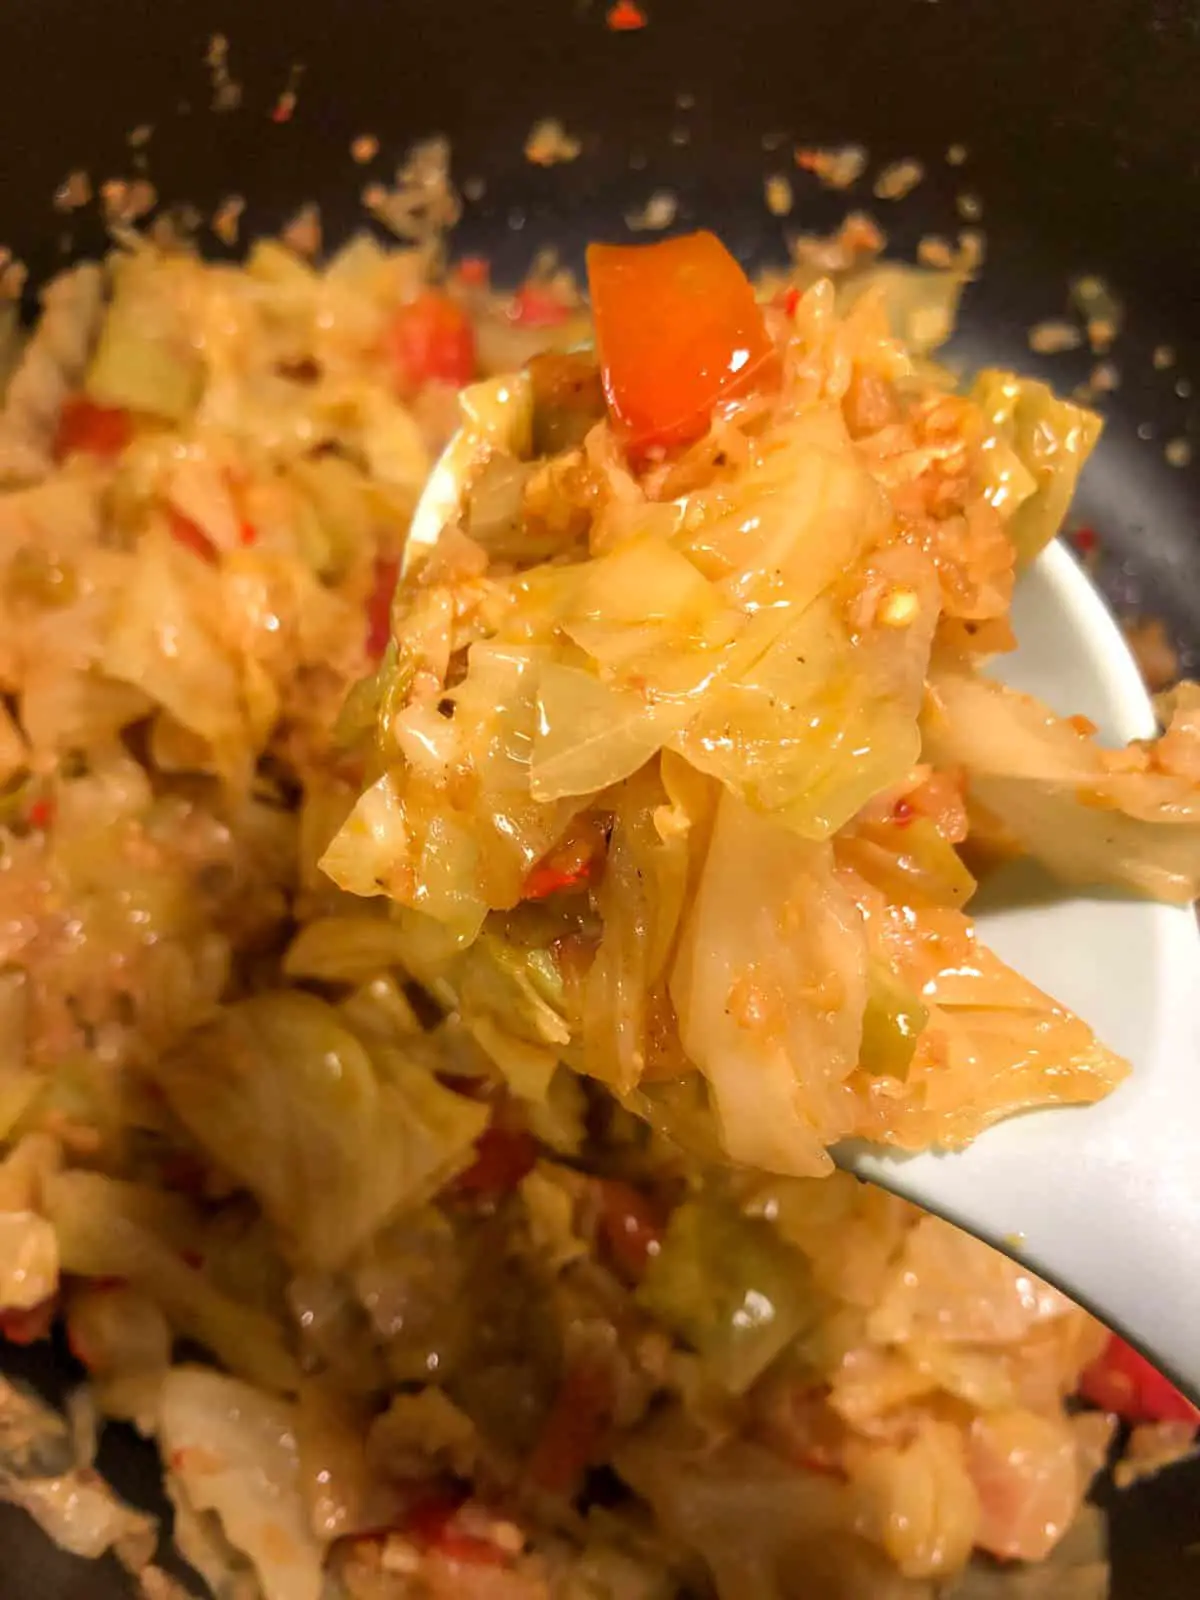 Cooked Indian Spiced Cabbage with tomato in a large skillet with a spoonful of the cabbage in the foreground.